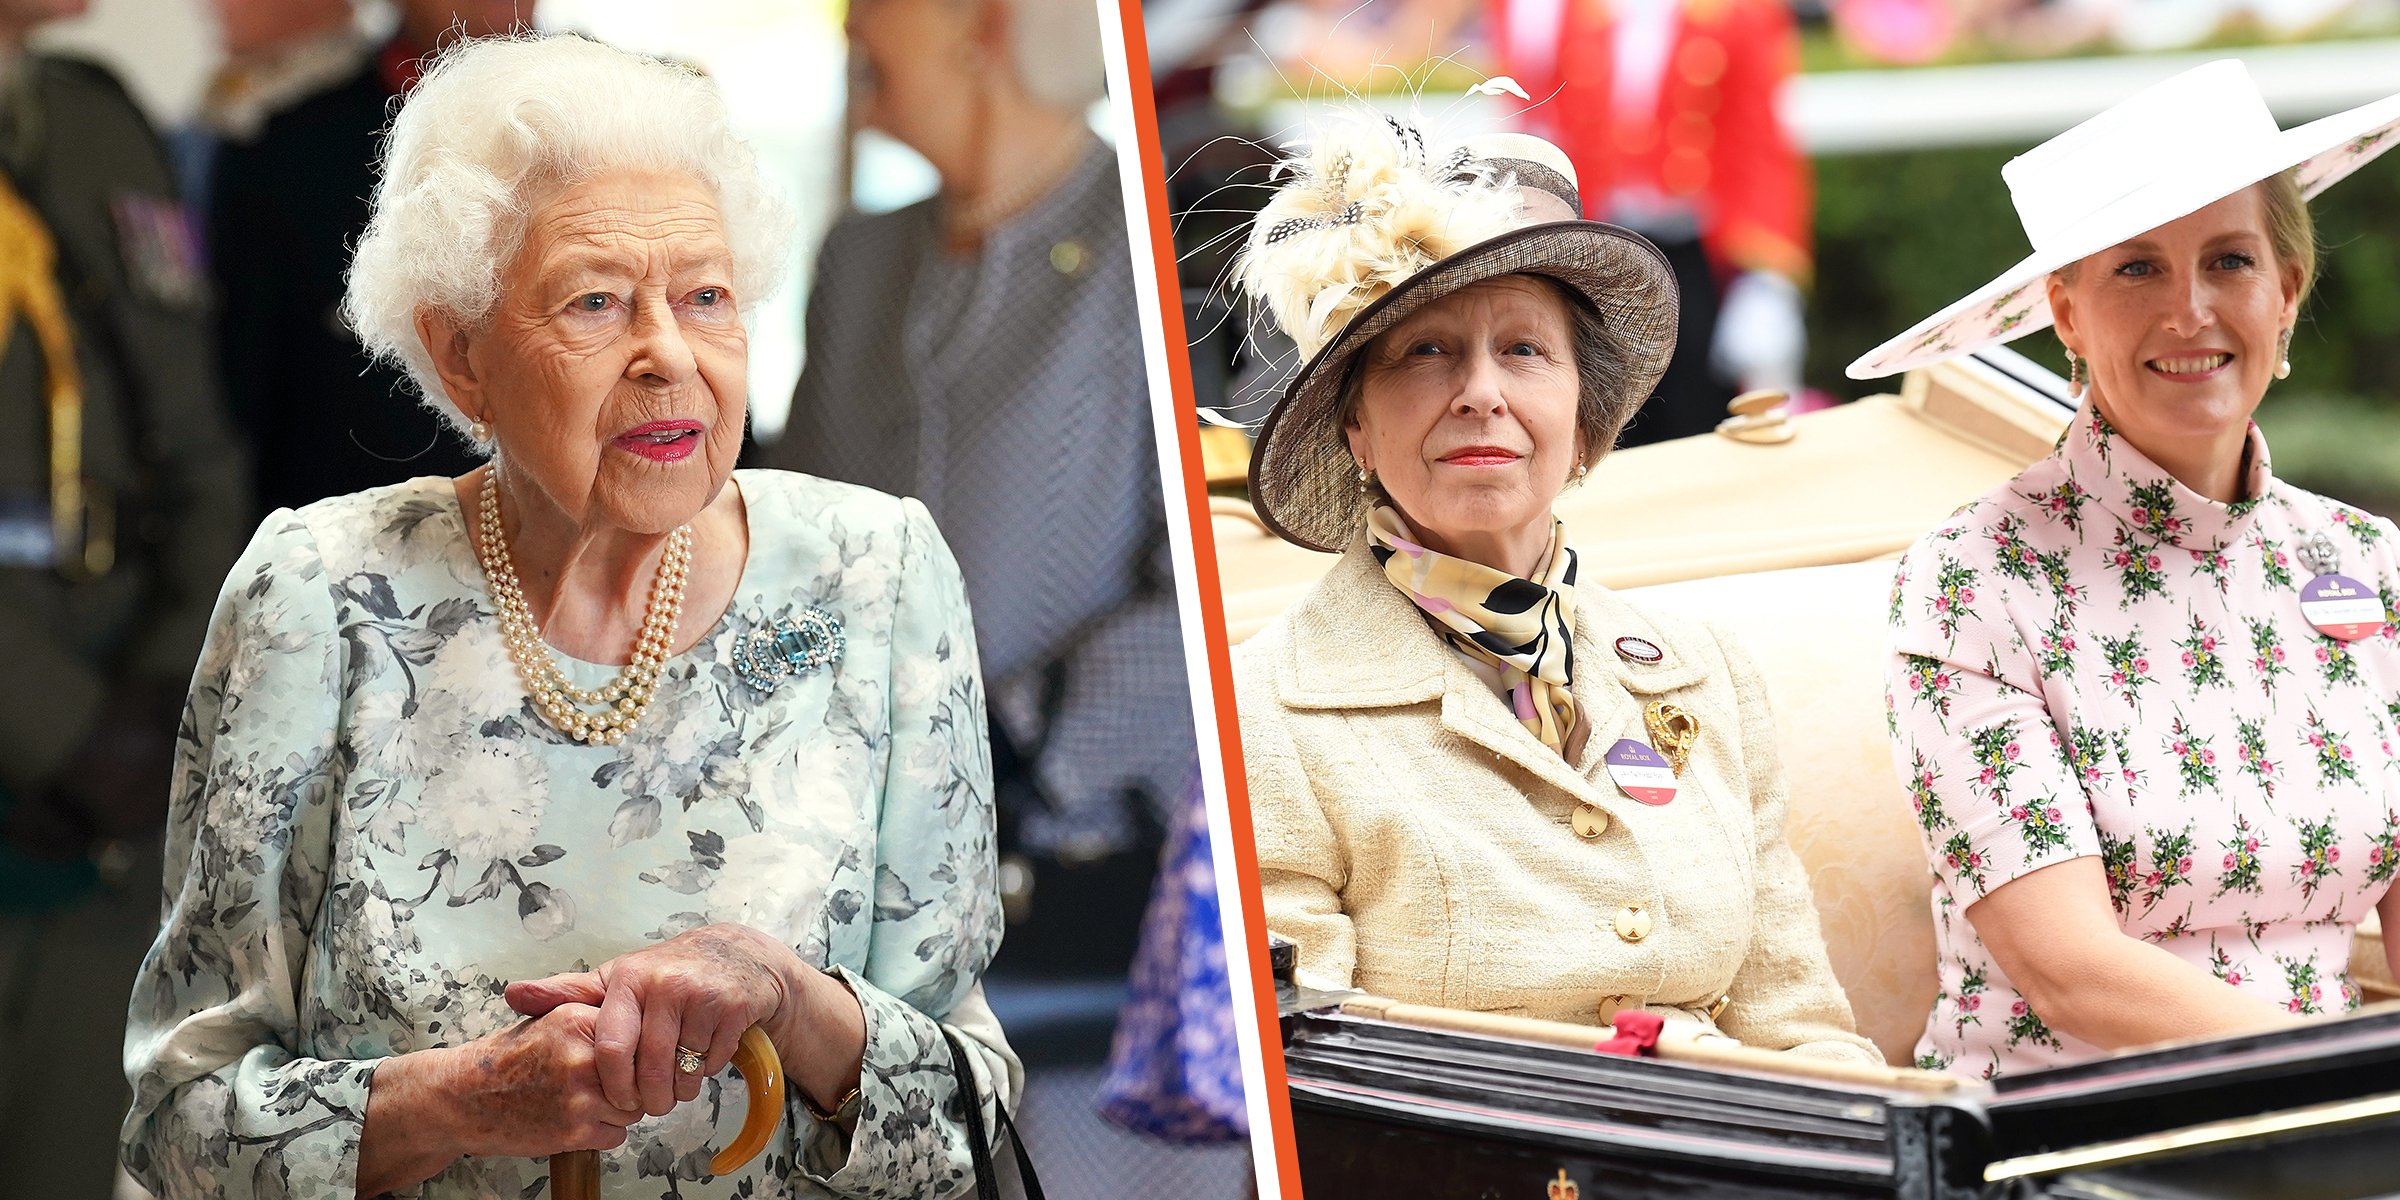 Queen Elizabeth II, 2022 | Anne, Princess Royal and Sophie Countess of Wessex, 2019 | Source: Getty Images